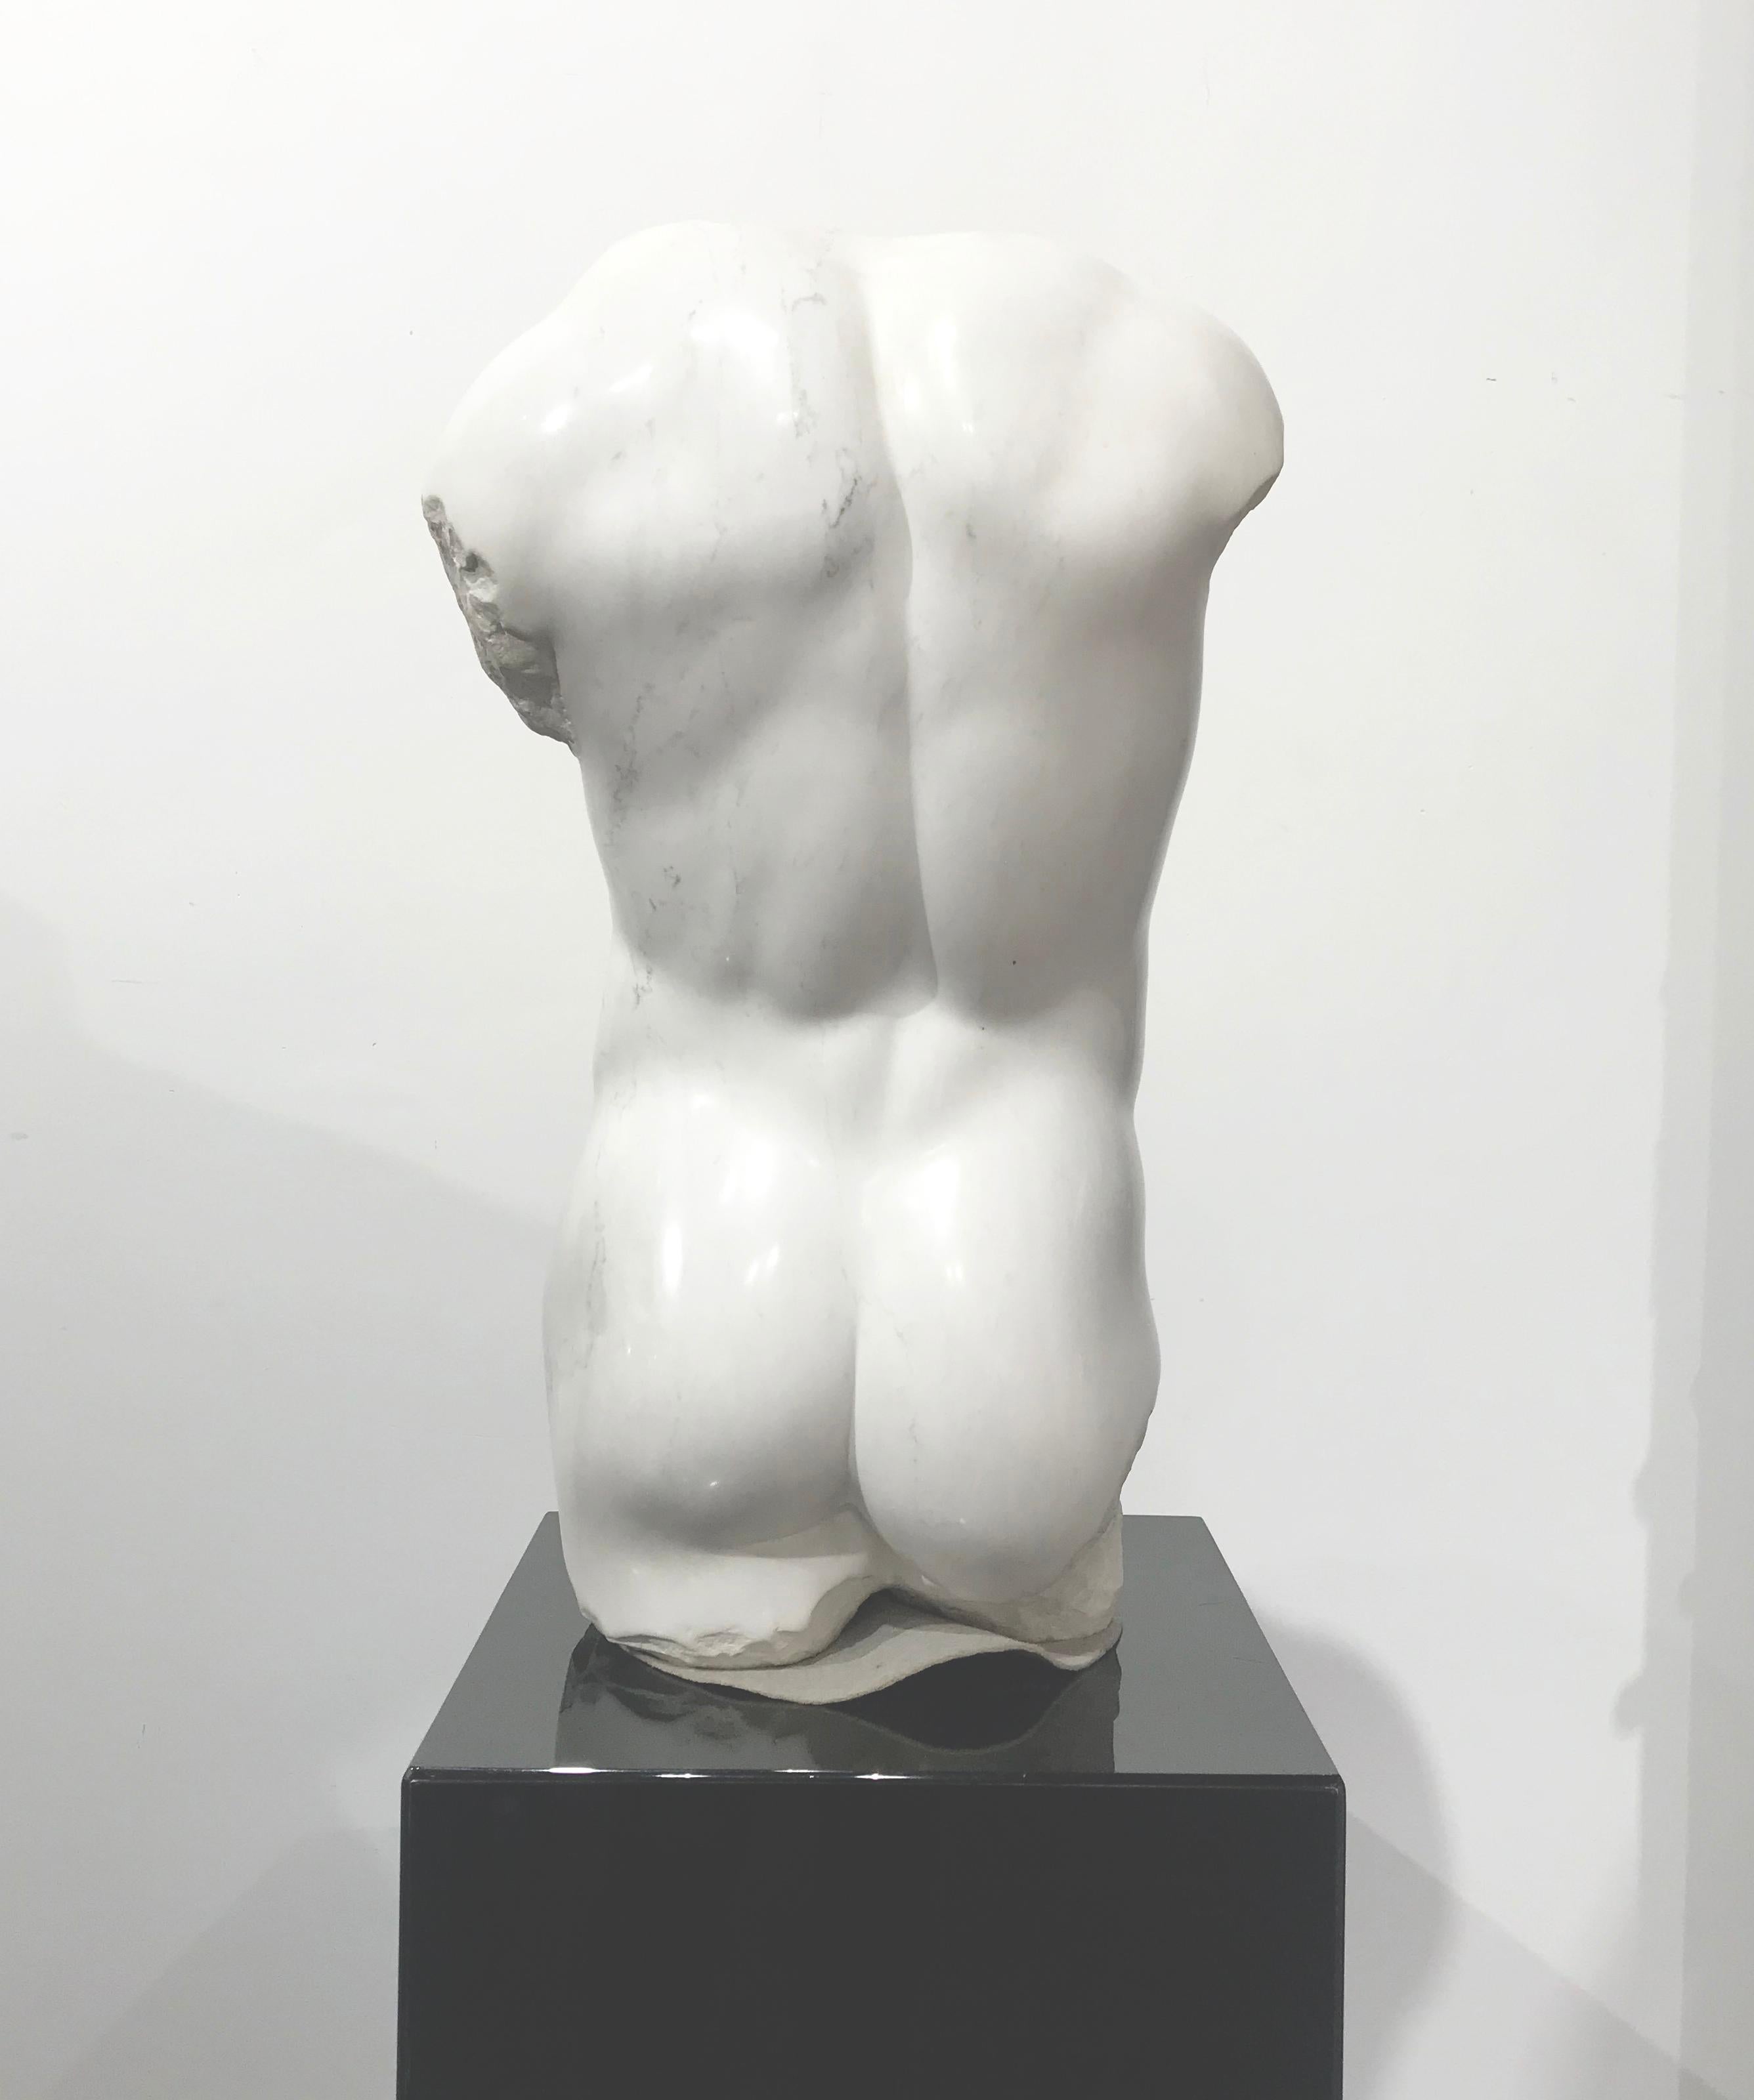 Fabulous large Sculptured Marble of a Nude Male Torso is a one-of-a-kind, carved in solid Vermont marble directly out of a geometric block; the eye level views the majestic Torso all around without any obstruction, with the aid of natural light.